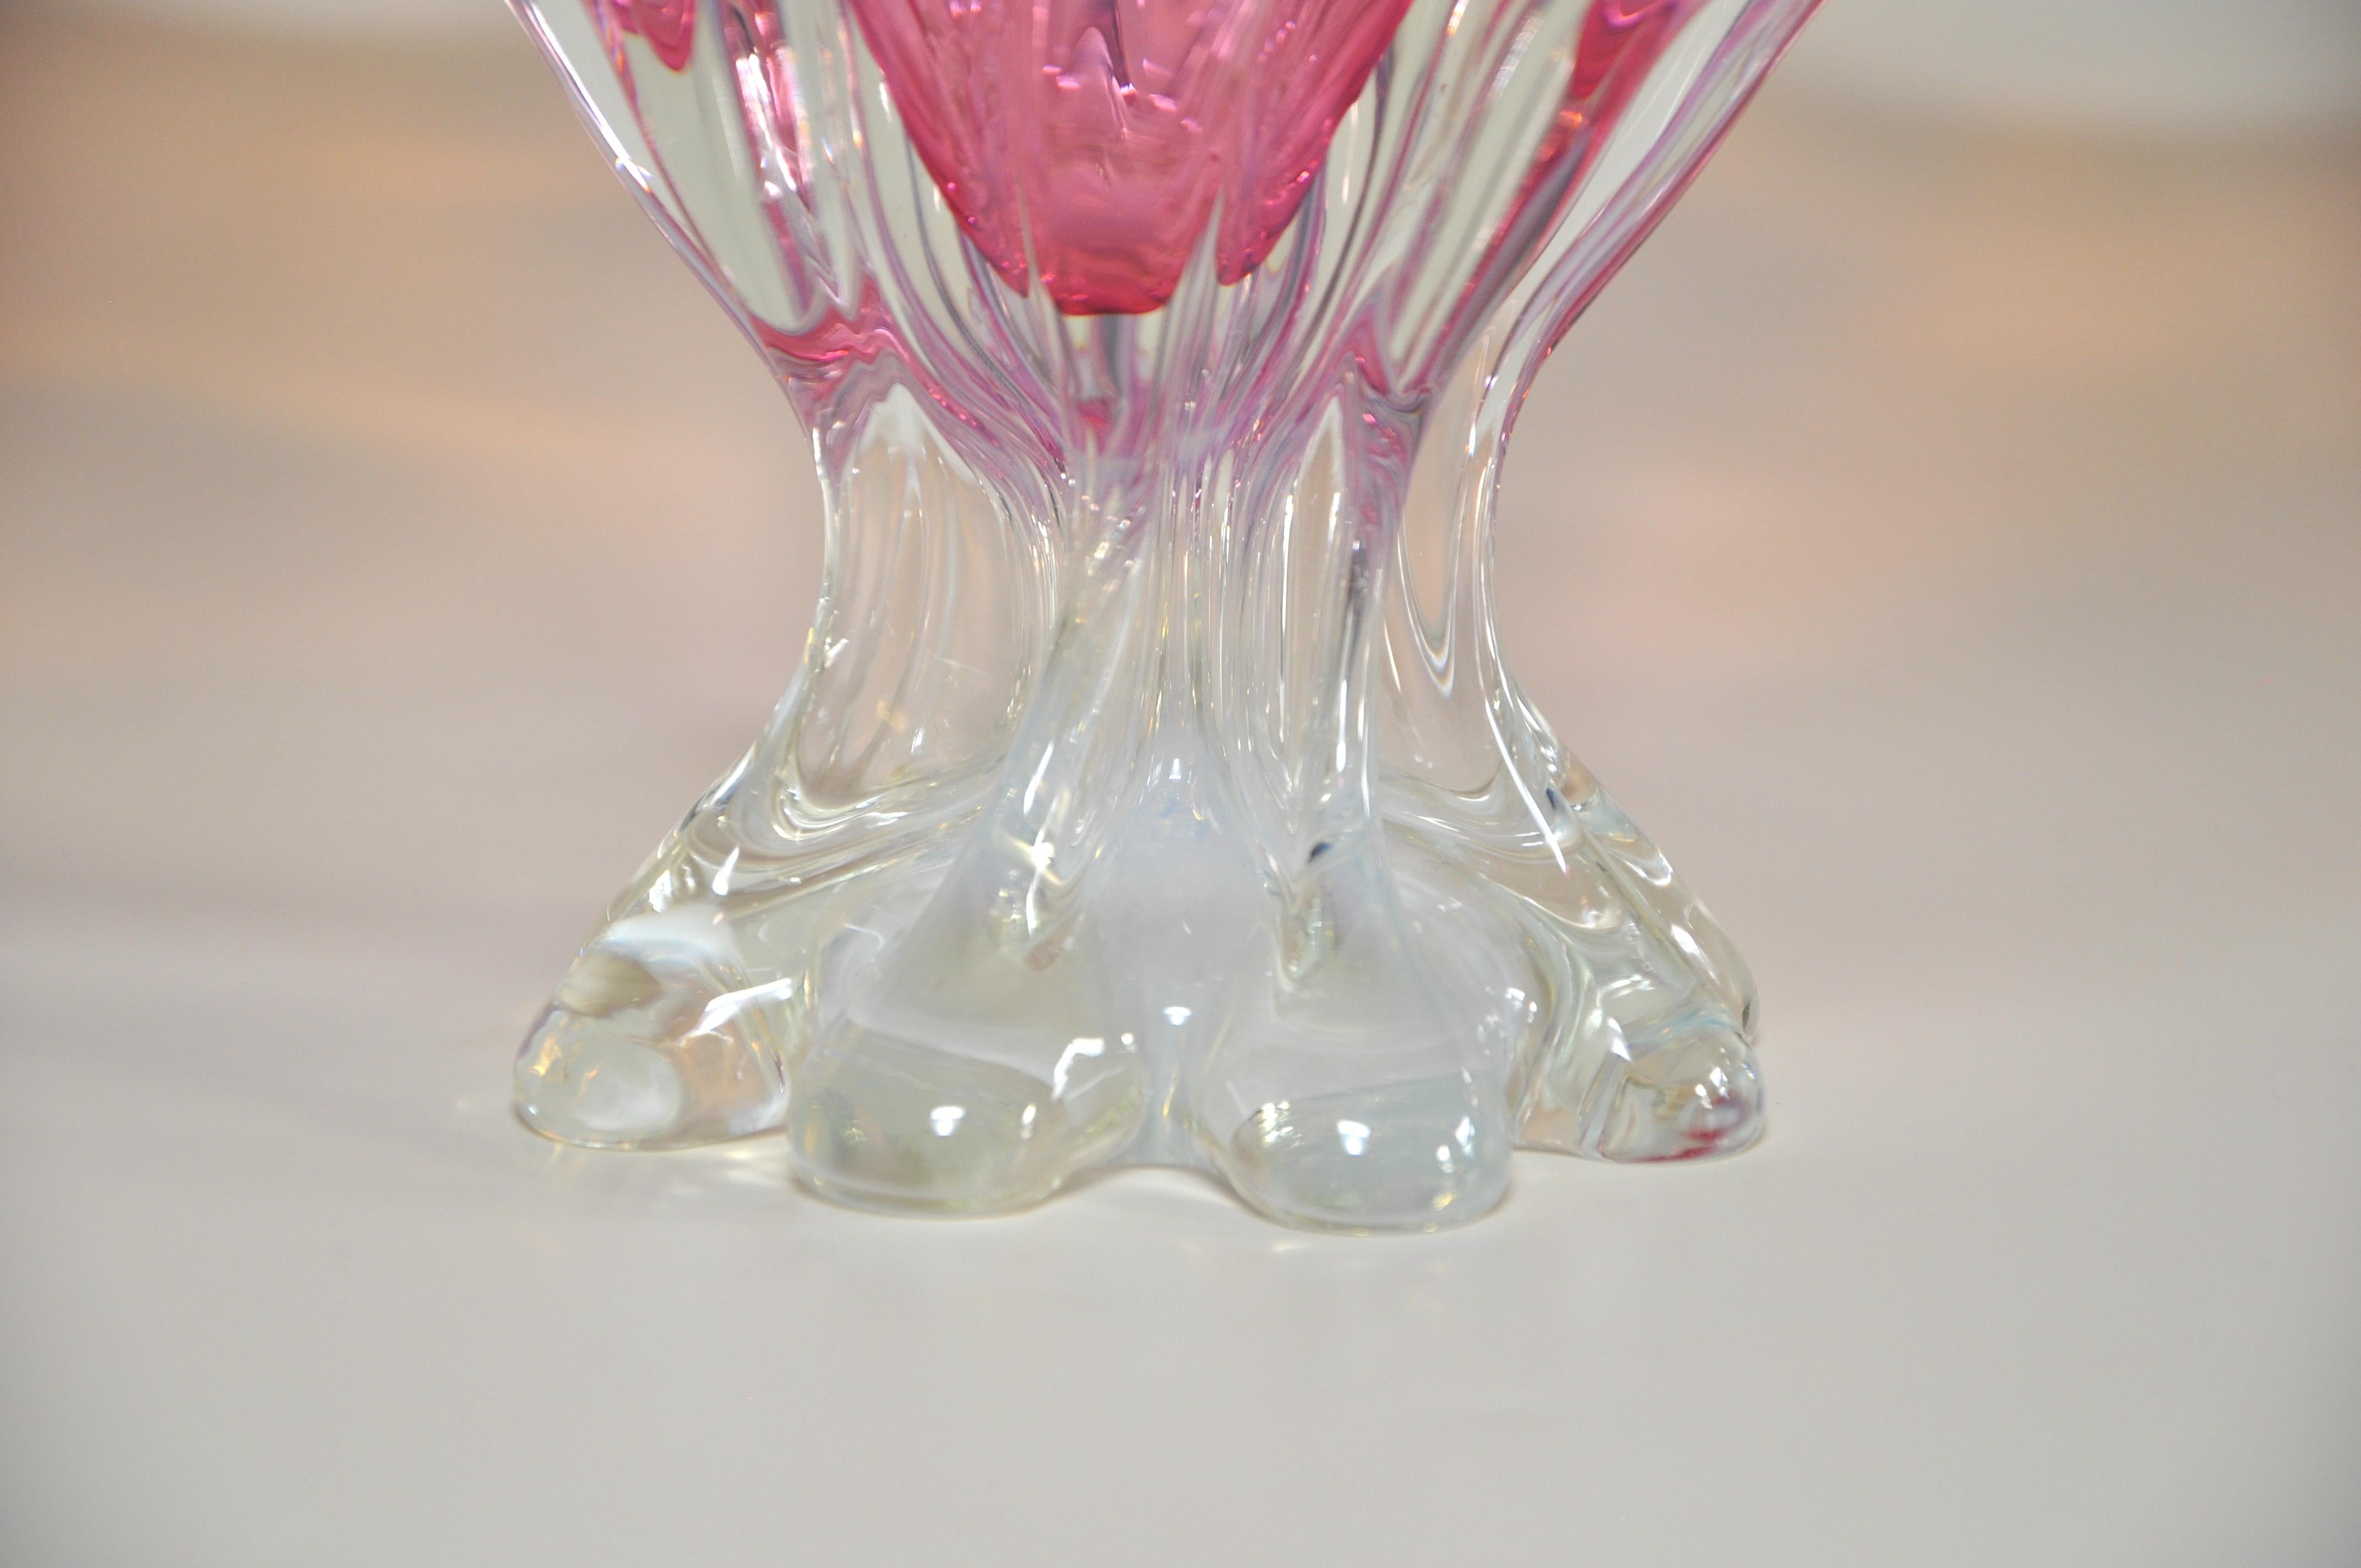 Large Stunning Vintage Pink White Art Glass Vase Italian In Excellent Condition For Sale In Belfast, Northern Ireland